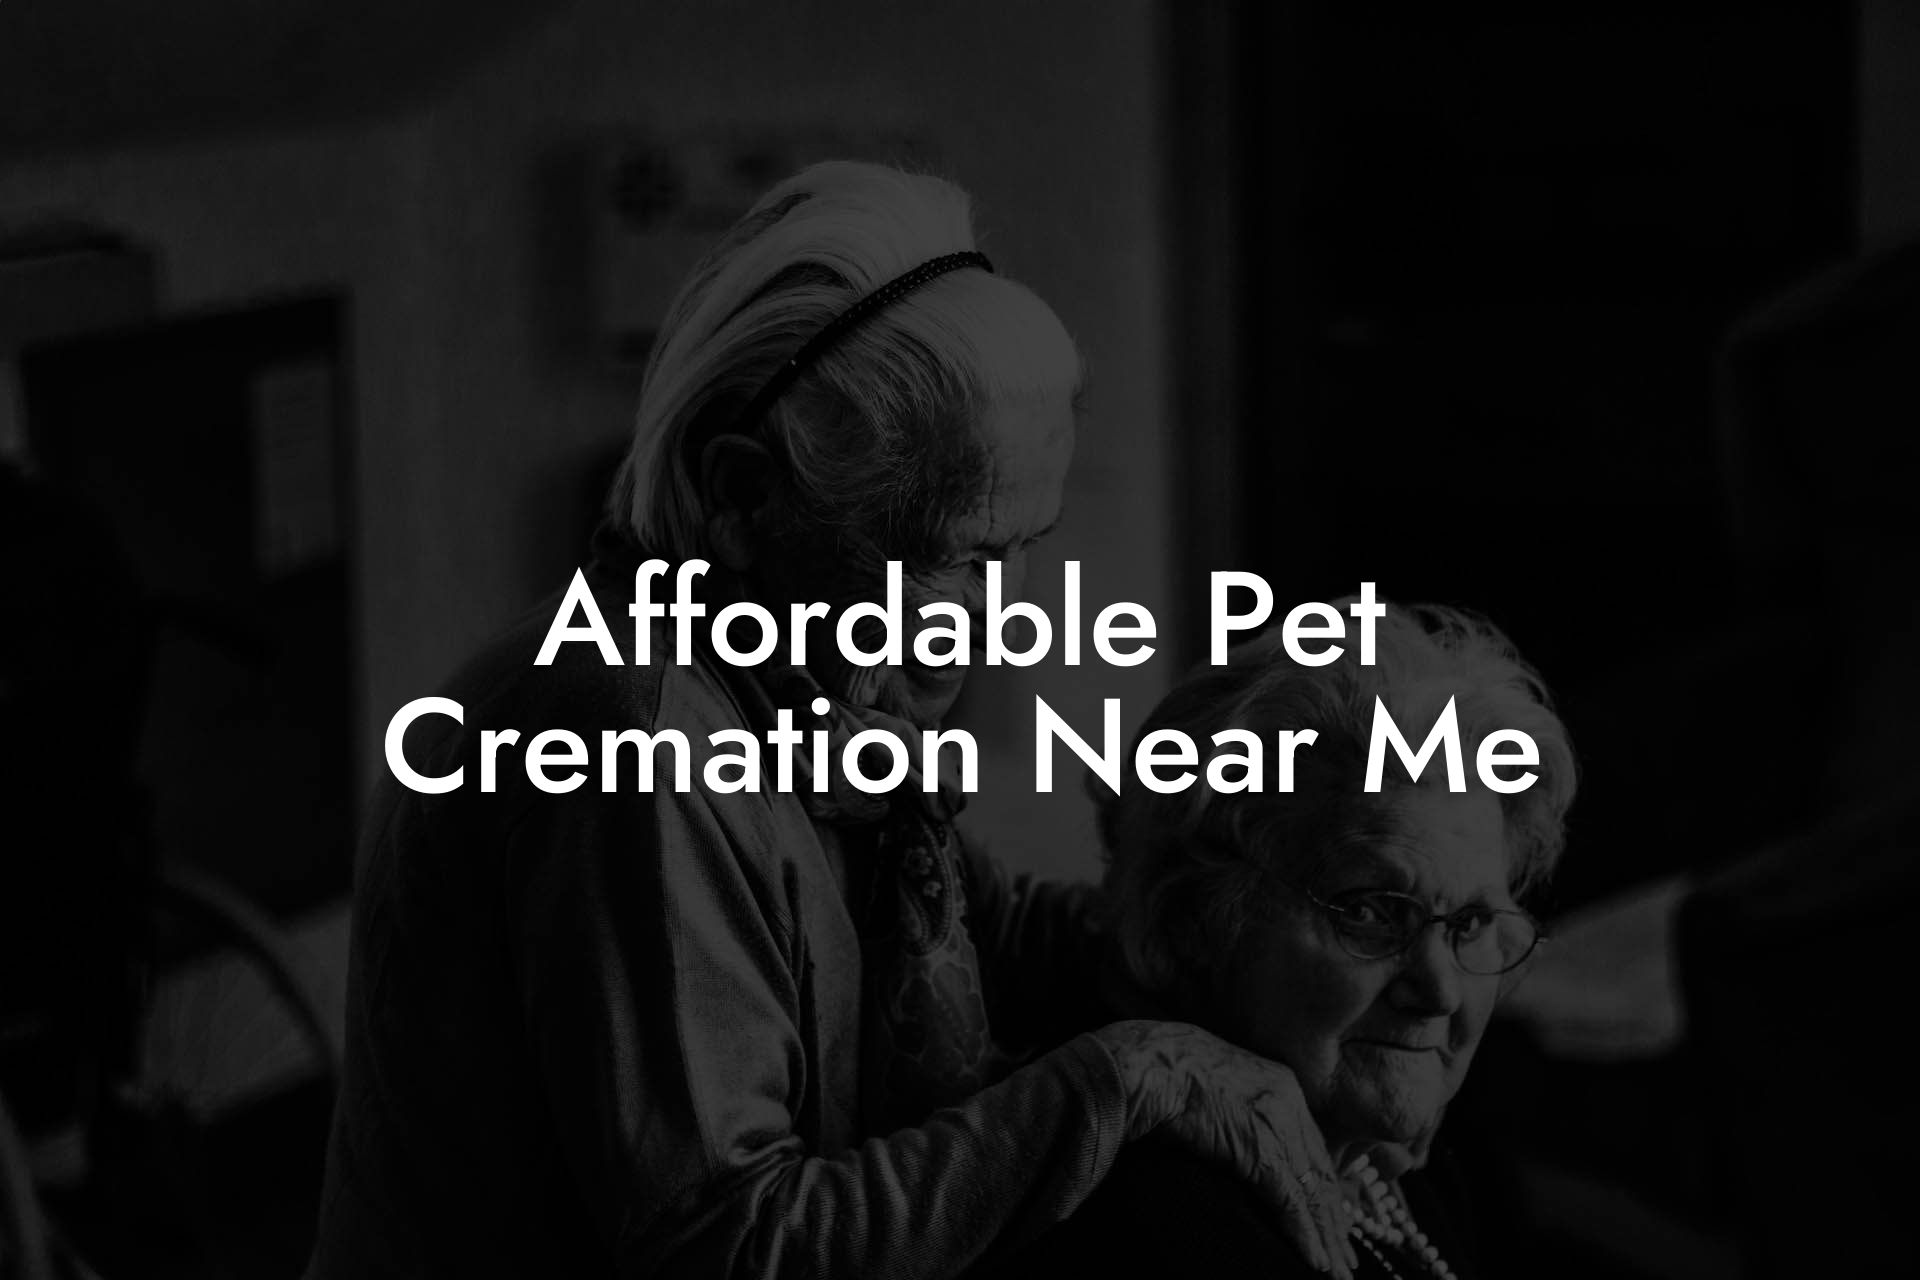 Affordable Pet Cremation Near Me Eulogy Assistant